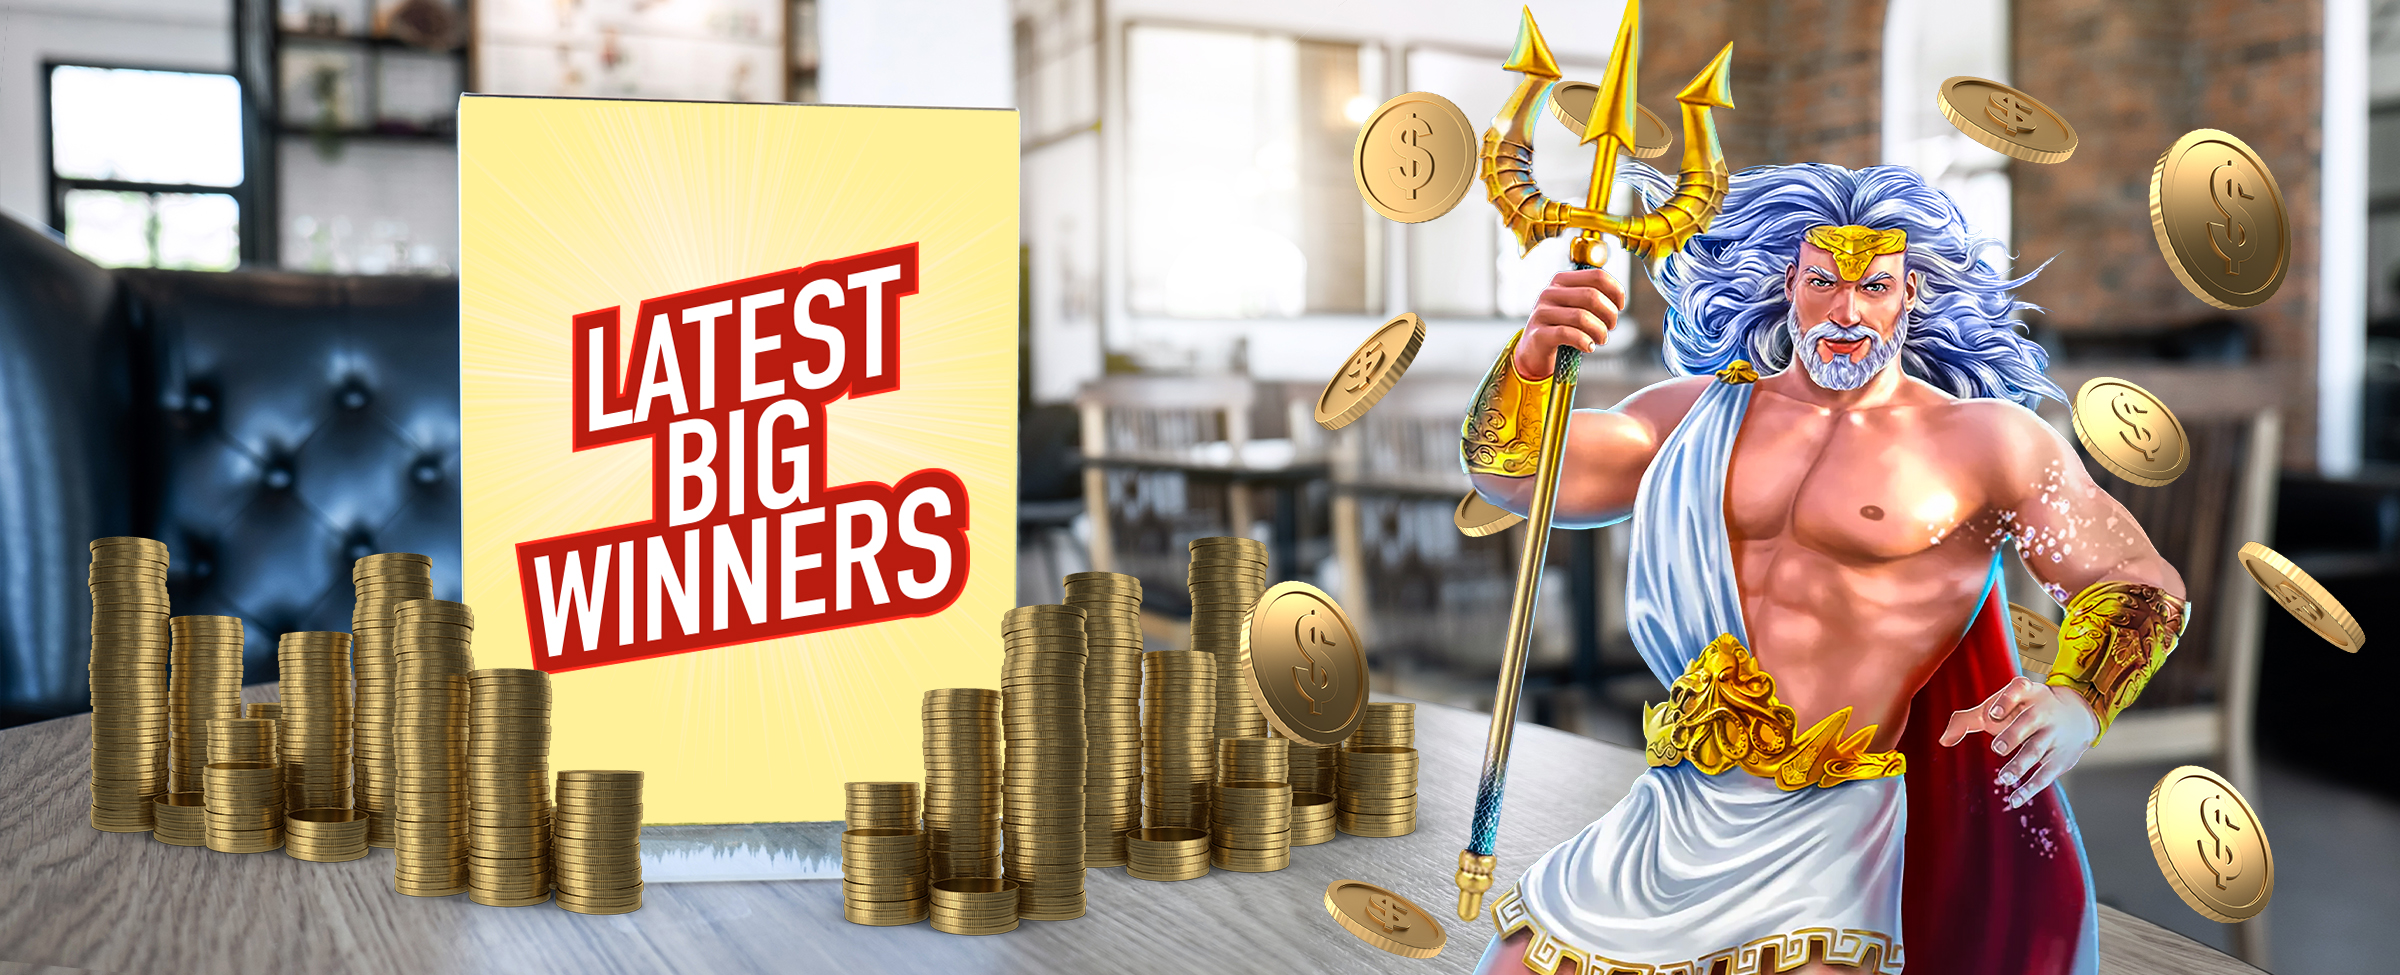 An animated character of Zeus is seen holding a staff, surrounded by floating coins. Next to him is a cafe bench with a menu that reads “latest big winners”, flanked by stacks of gold coins. In the background is an out-of-focus cafe.